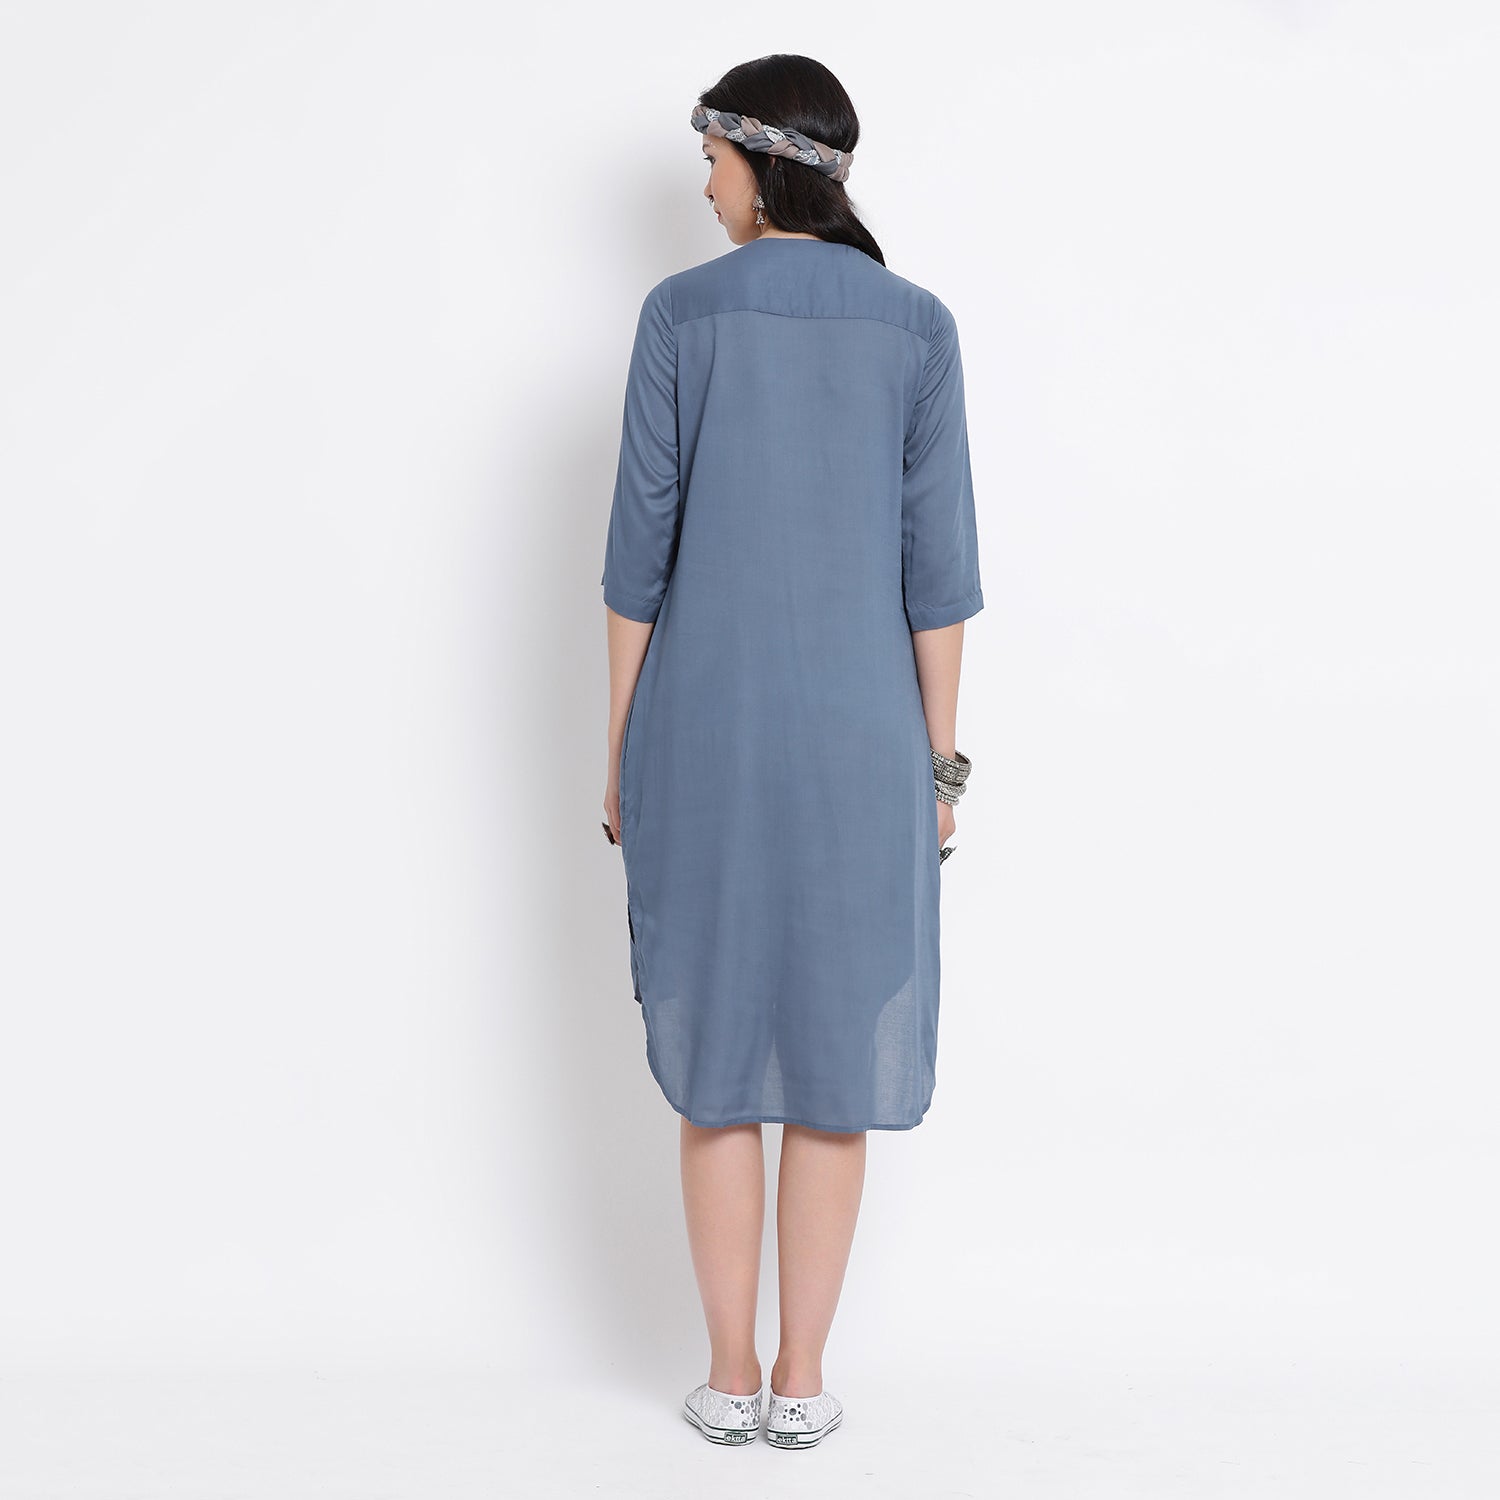 Blue long viscose tunic with mirror embroidery at yoke